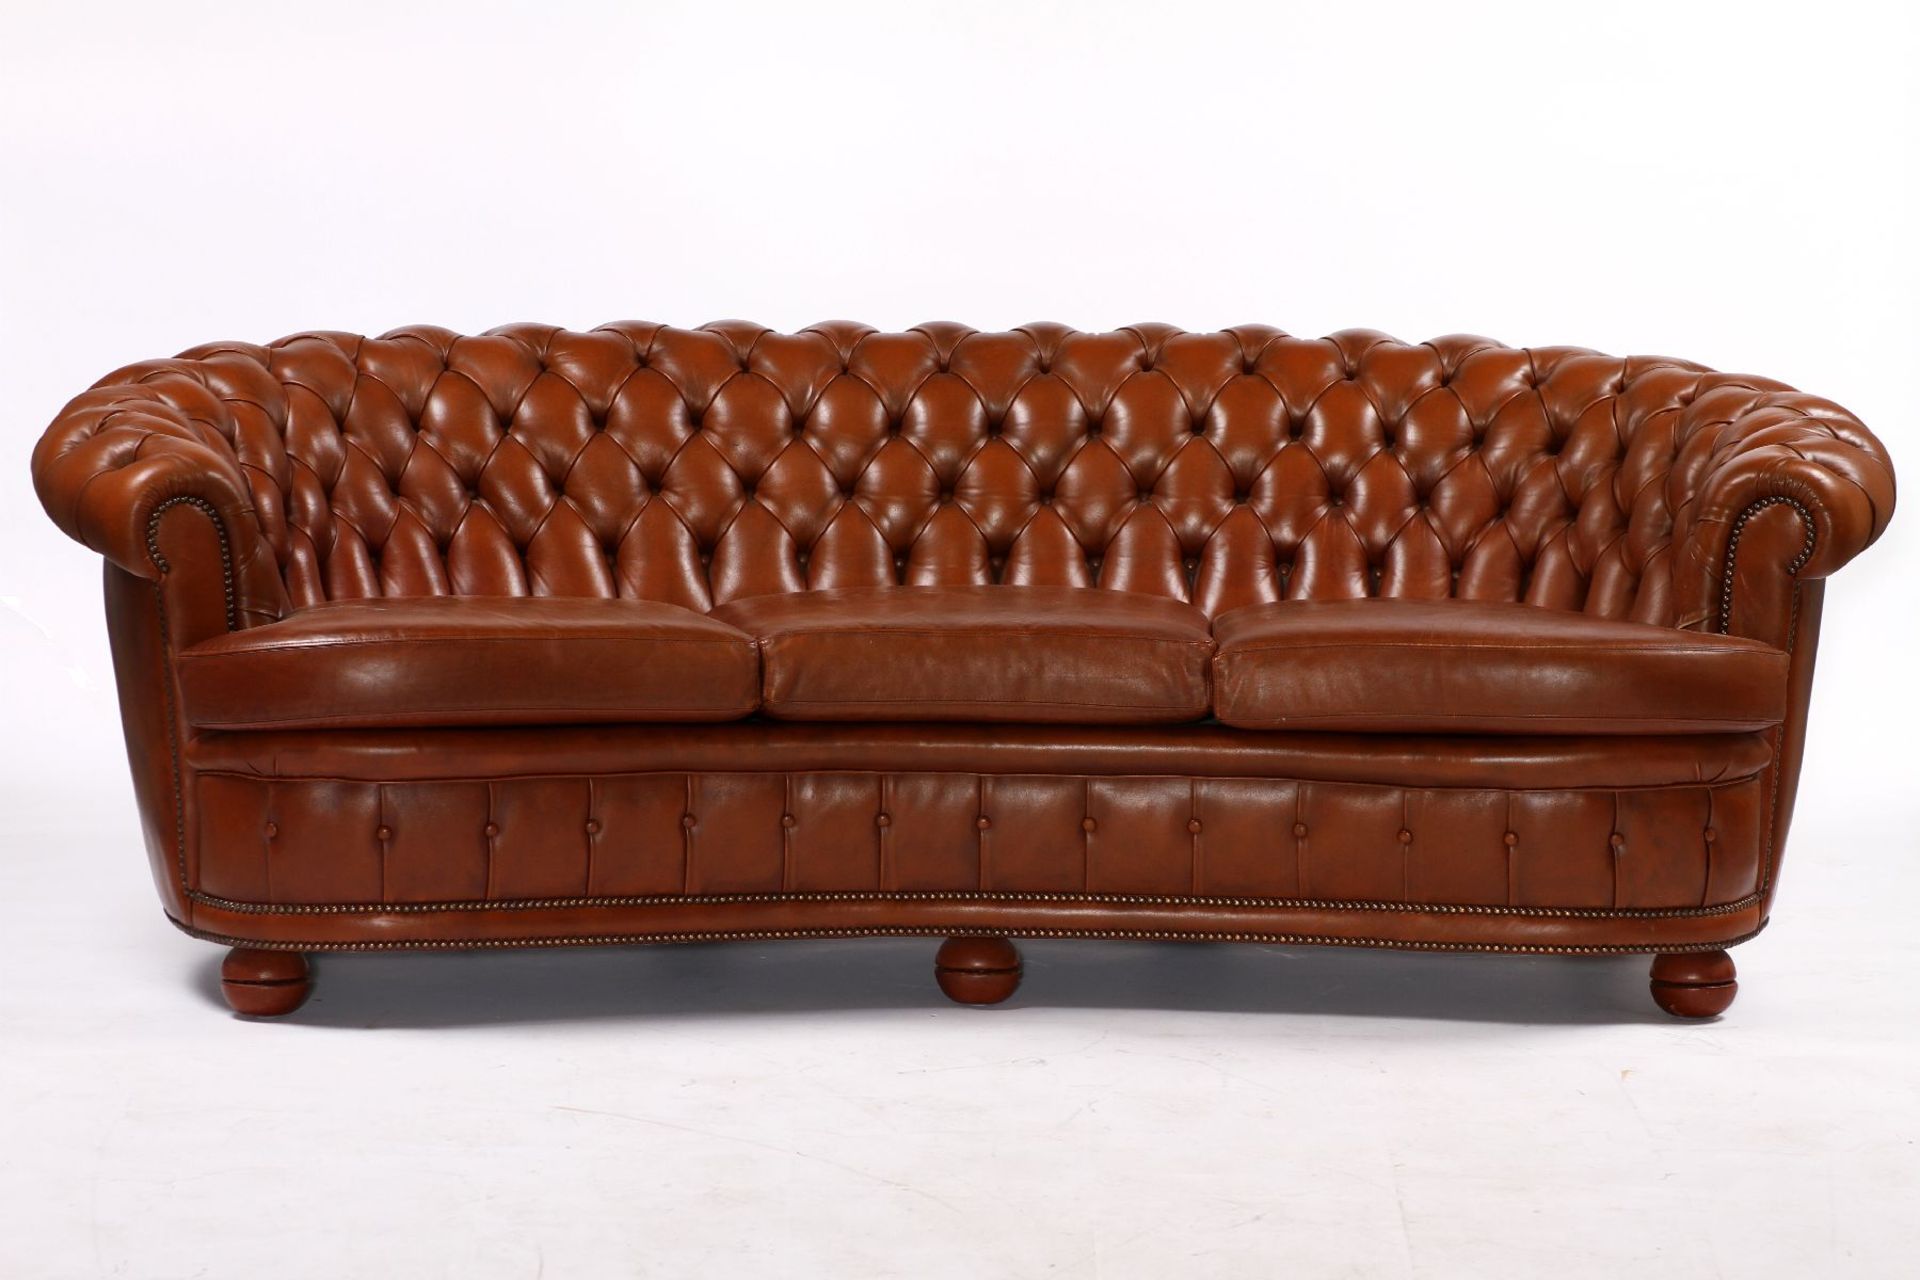 3-seater sofa and 2 armchairs, in Chesterfieldstyle, brown leather covers of very good quality, - Bild 2 aus 2